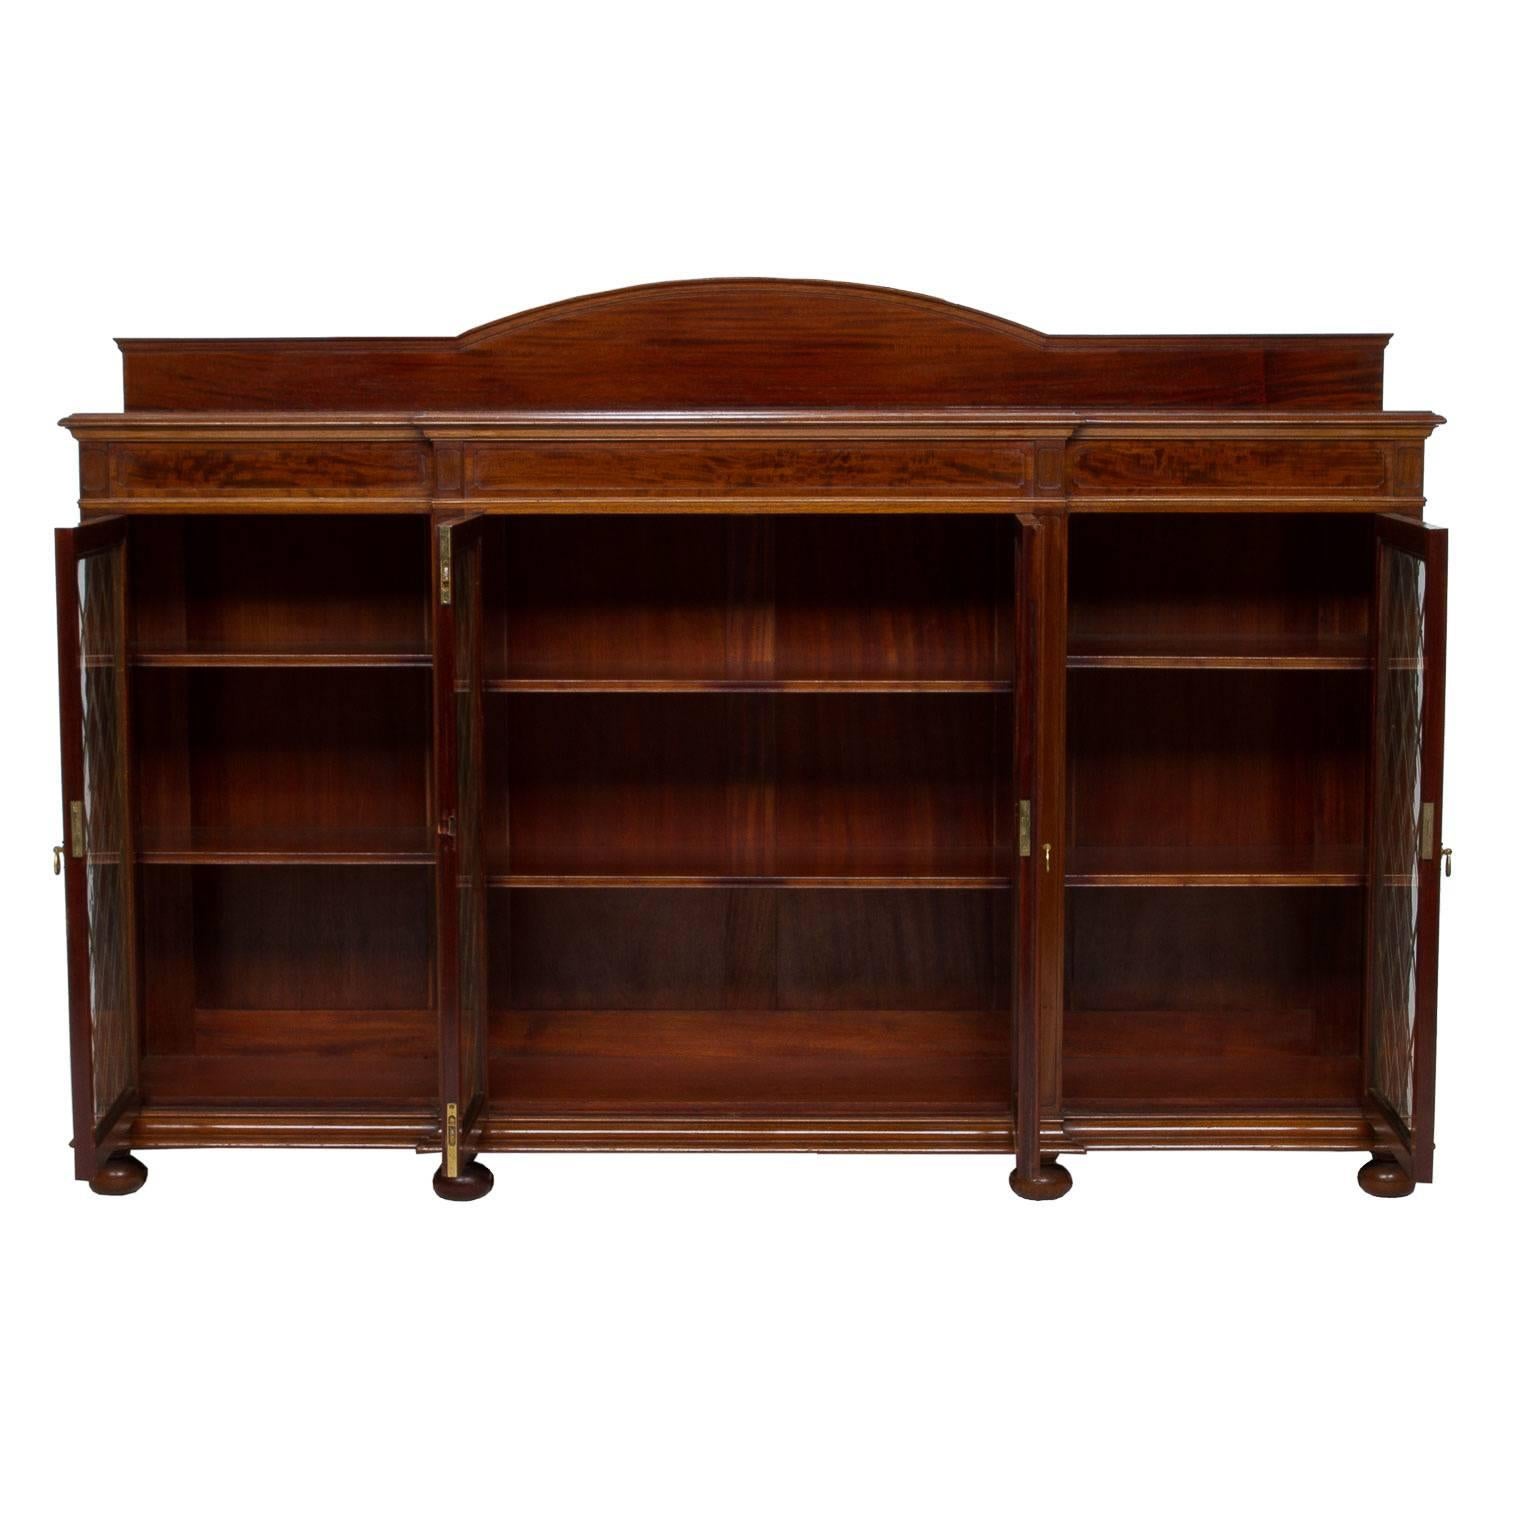 An impressive English mahogany credenza bookcase with a breakfront. There are four doors and each with glass and a brass mesh in a diamond shaped pattern. Fine French polish over carefully chosen figured mahogany. Resting on bun feet. The breakfront